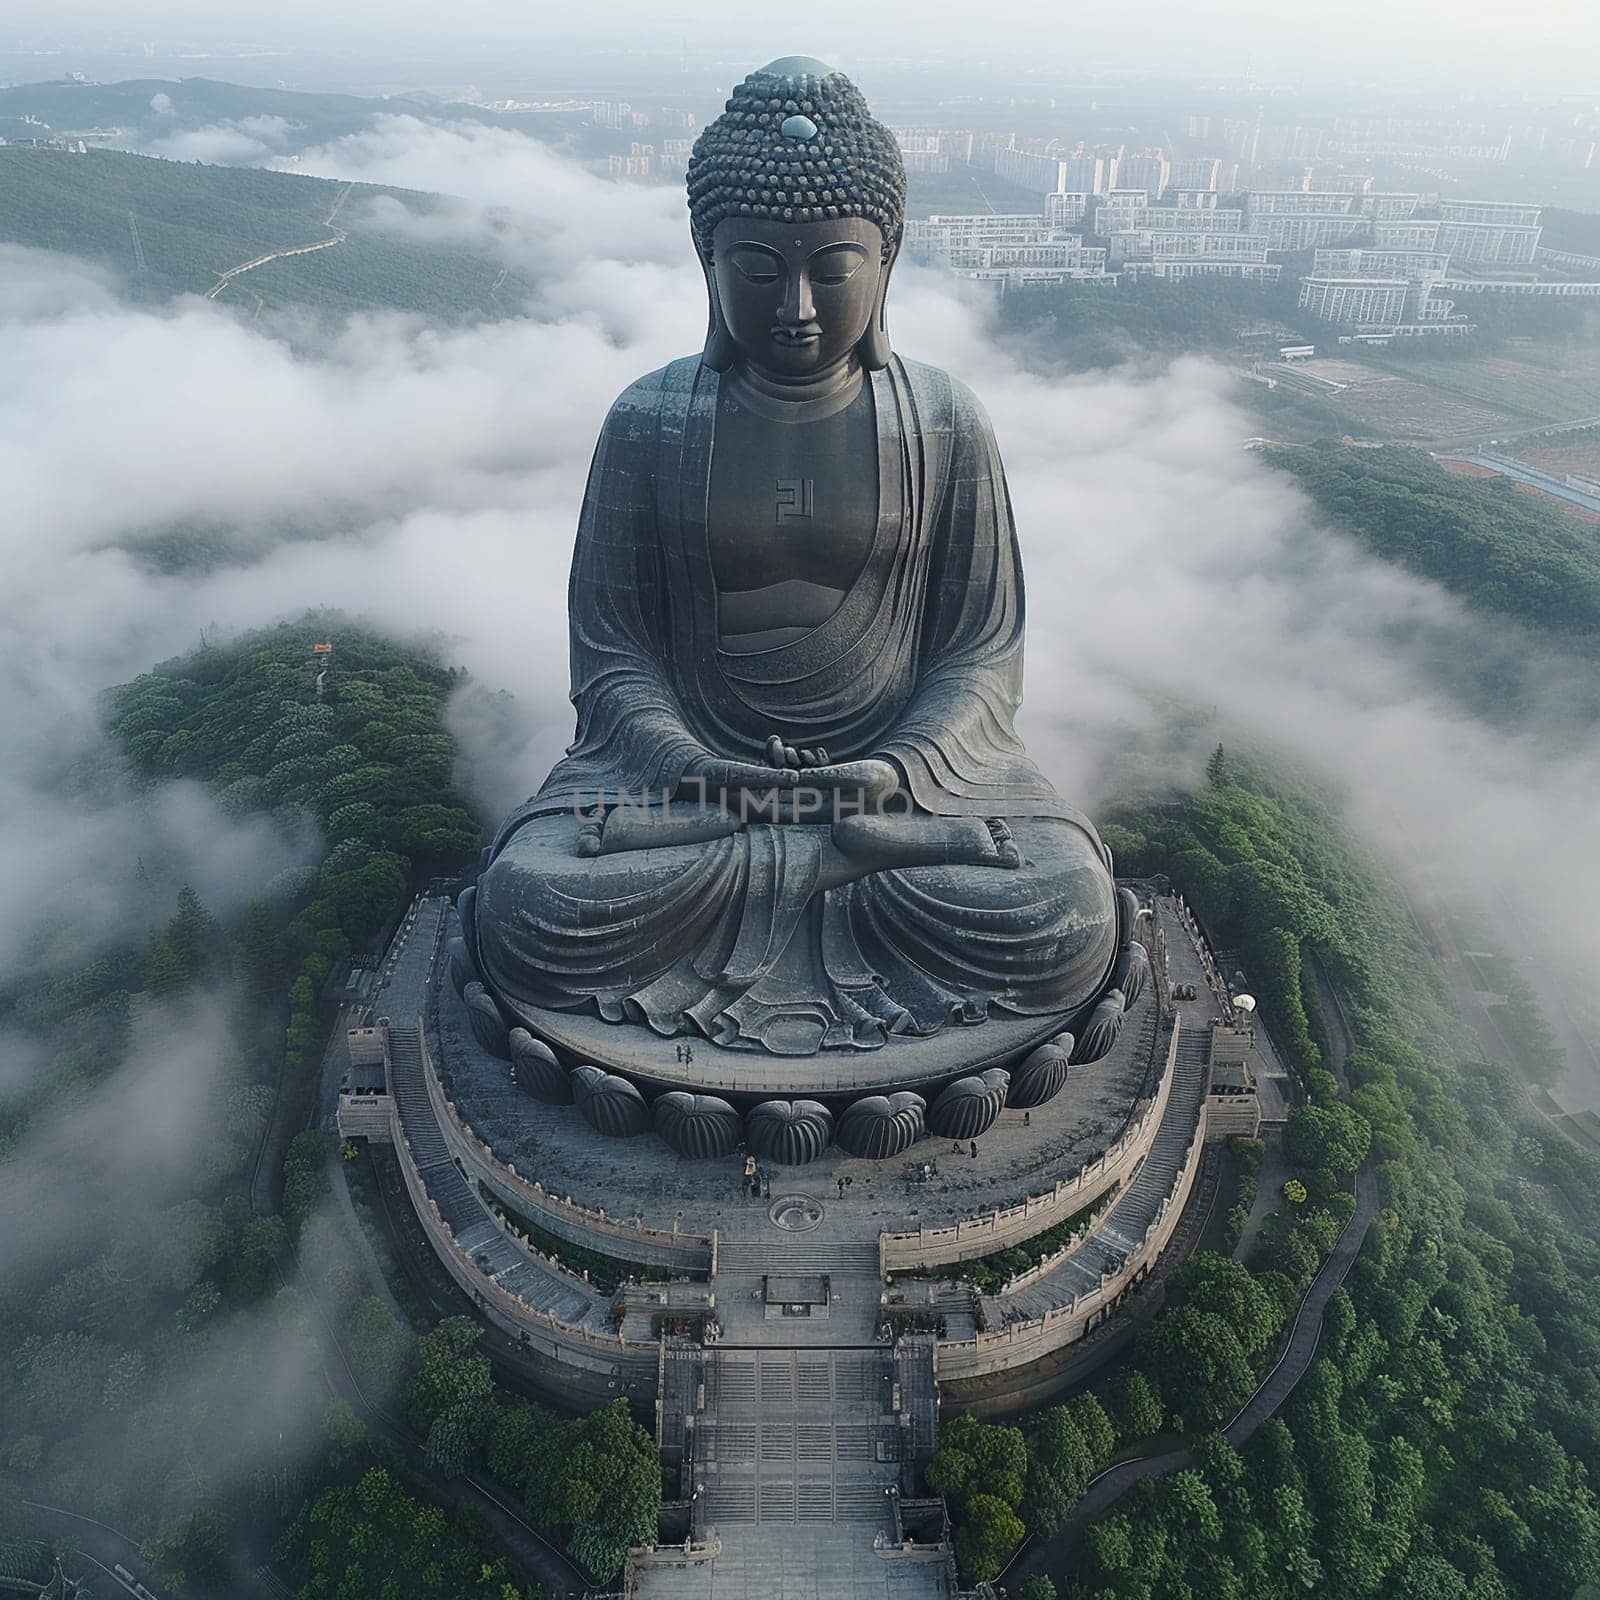 Giant Buddha Statue Overlooking a Misty Landscape The majestic figure merges with the fog by Benzoix